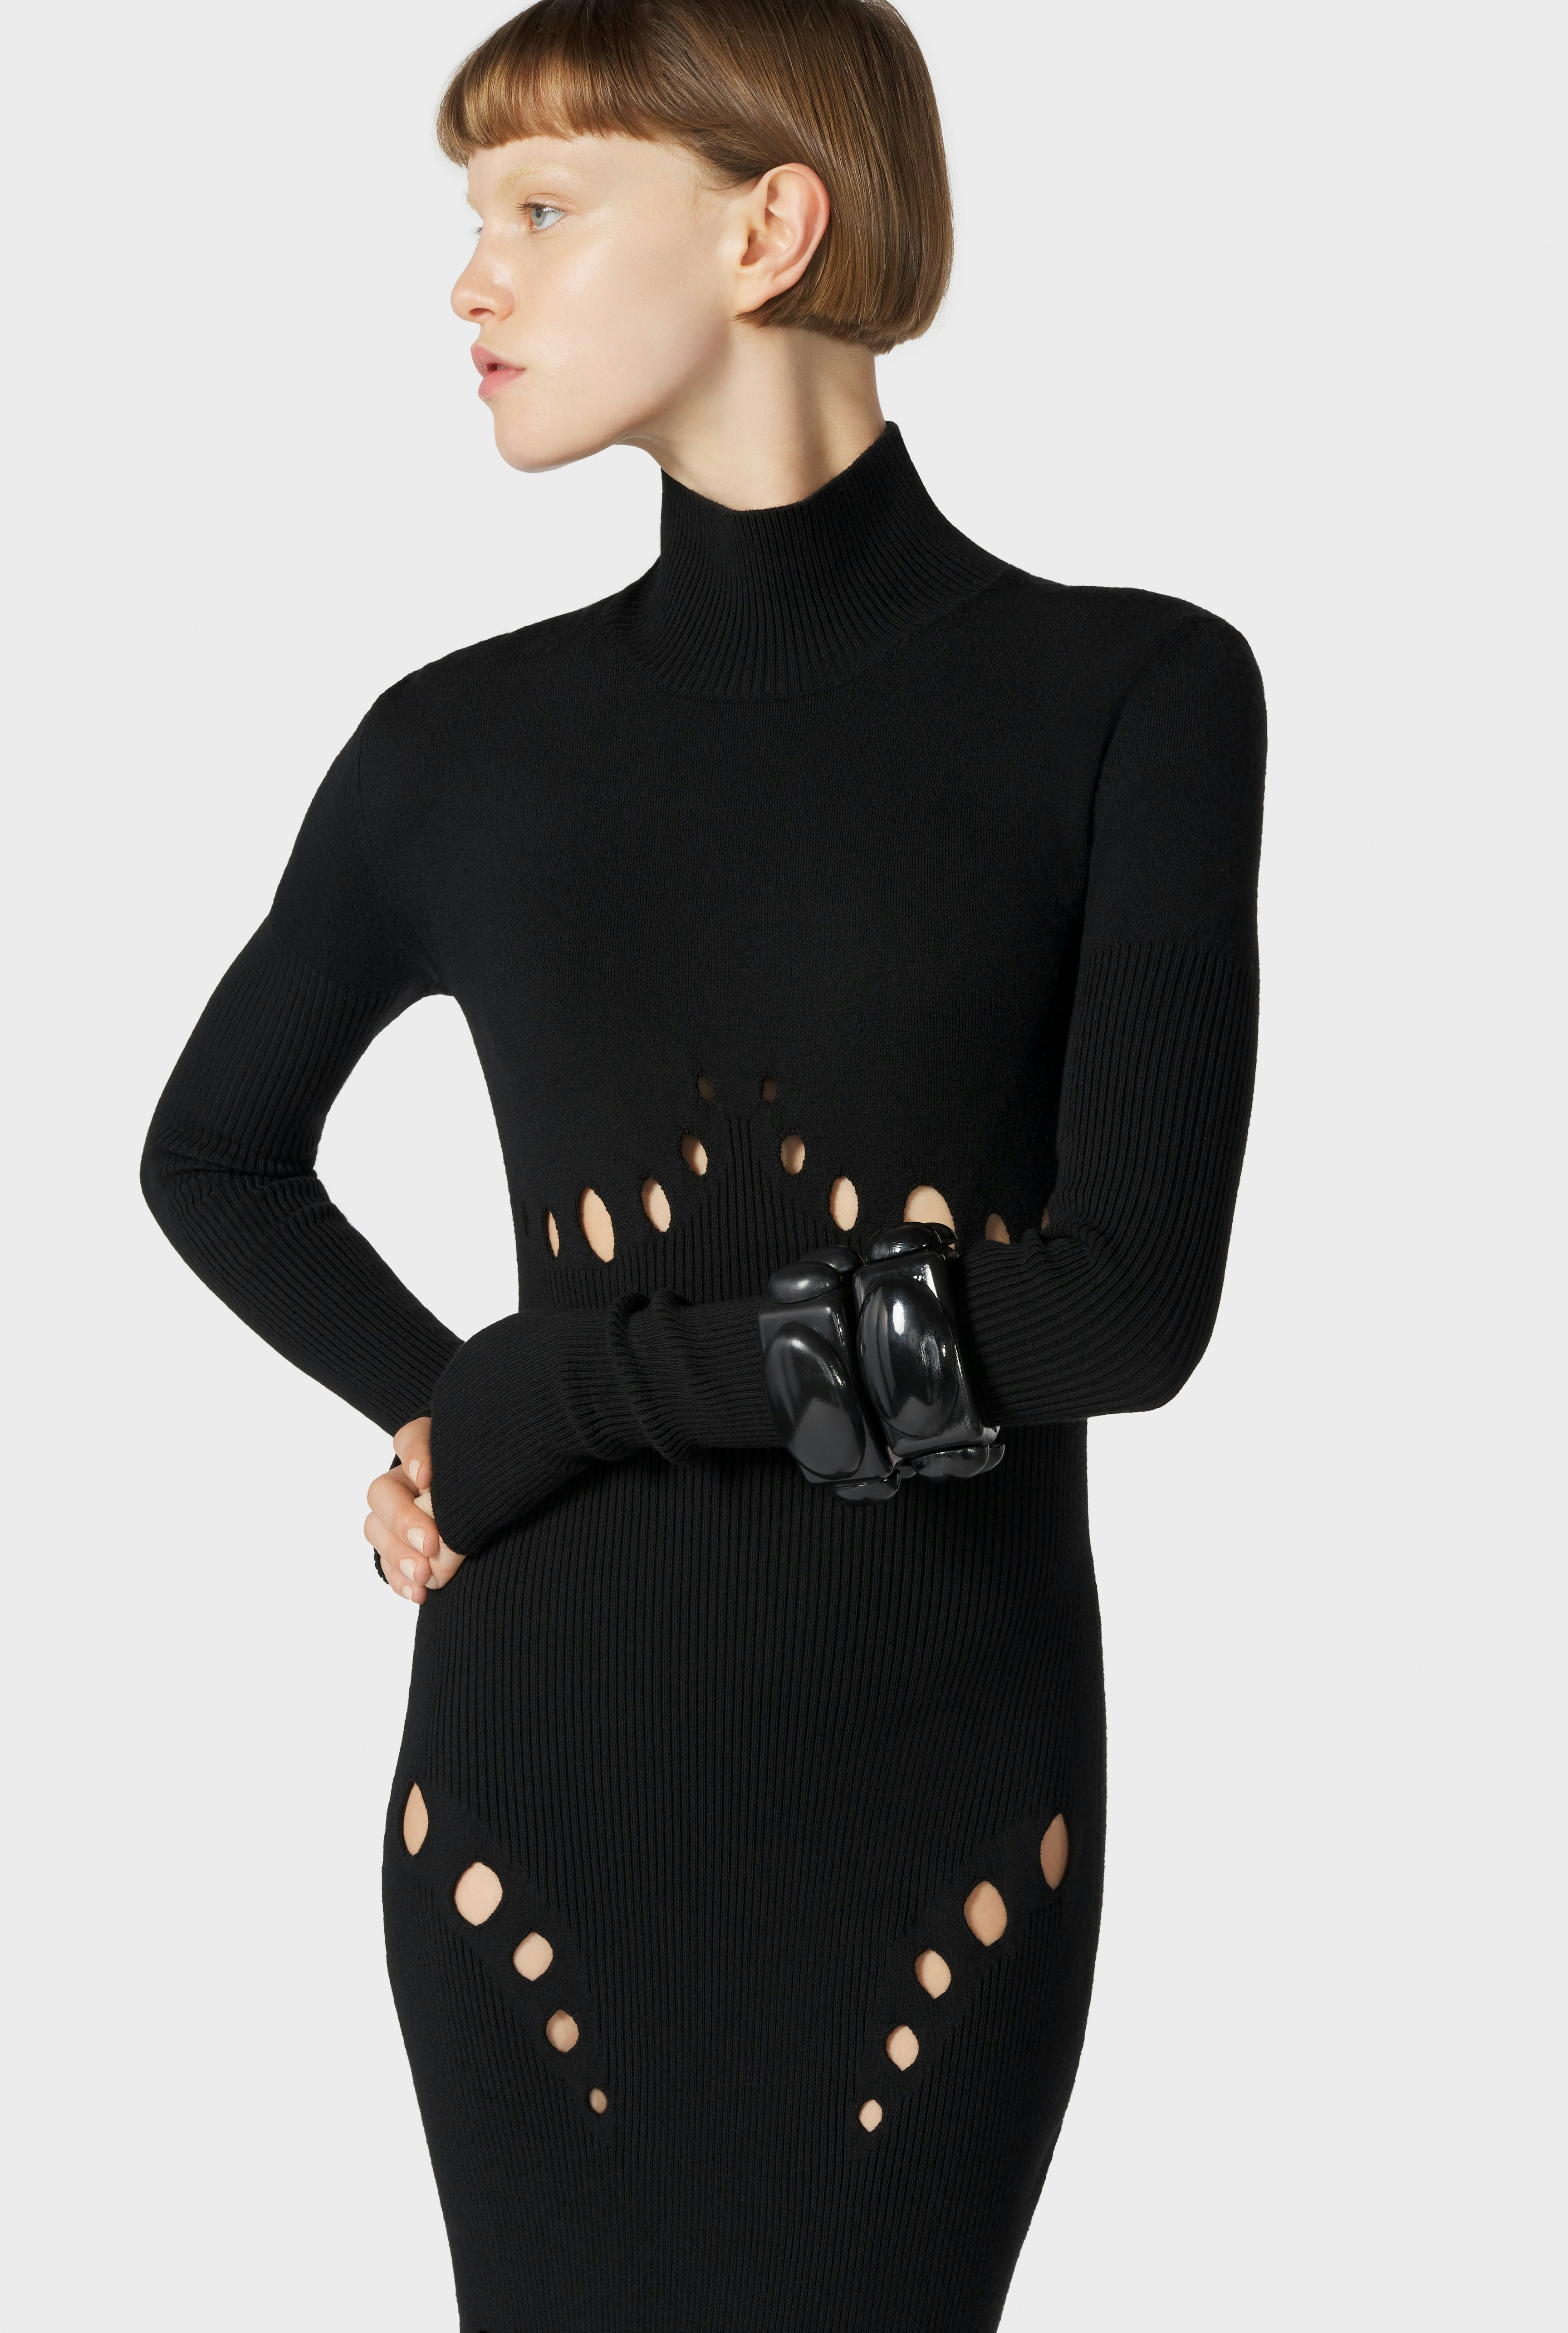 The Black Openworked Knit Dress